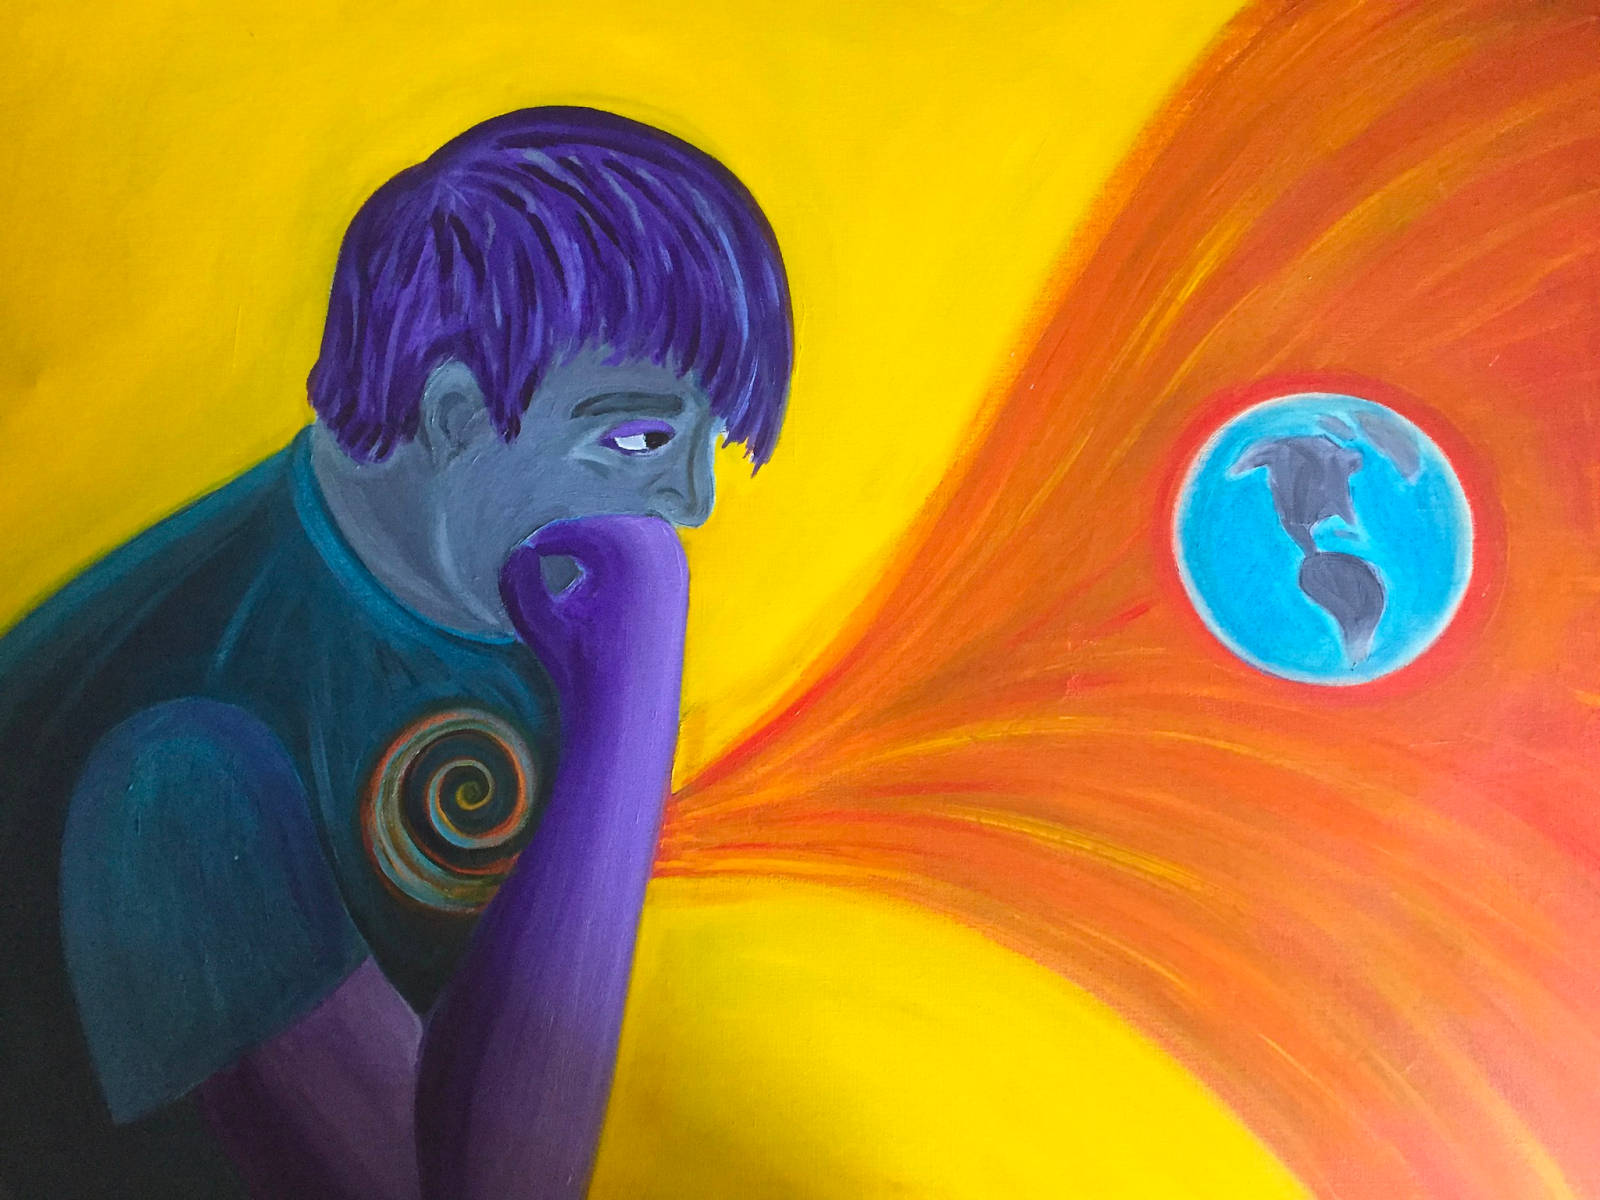 A self-portrait Michael created for their high school senior project depicting a “hunched over” figure with purple hair, a dark teal shirt, and gray/purple skin looking forward at an image of the Earth. The Earth is surrounded in a fiery expanse that whirpools into the internal space of the figure.